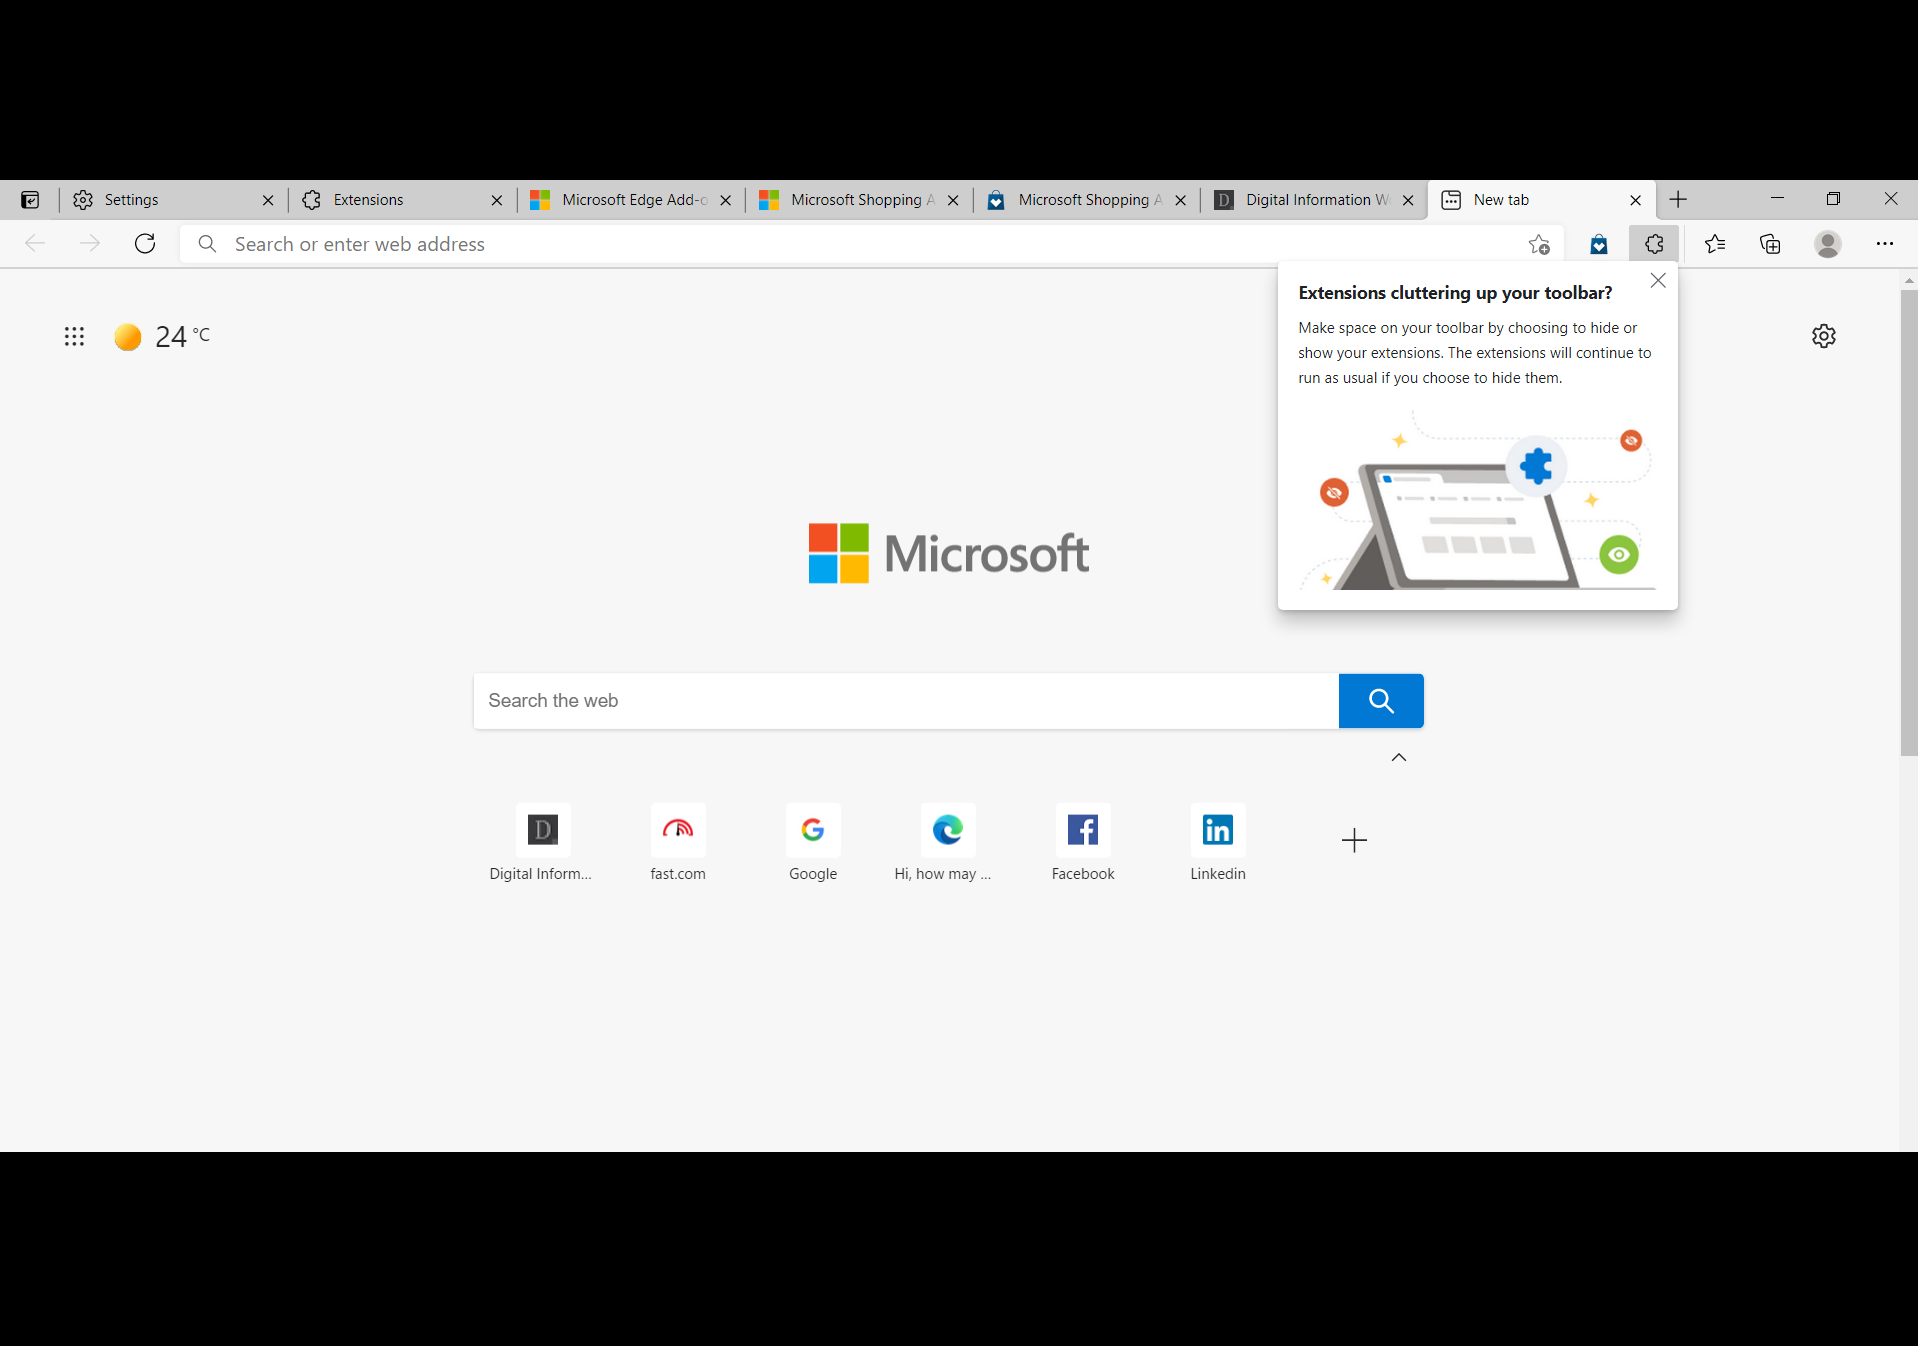 🔵How to pin Edge Extension in Microsoft Edge toolbar? 